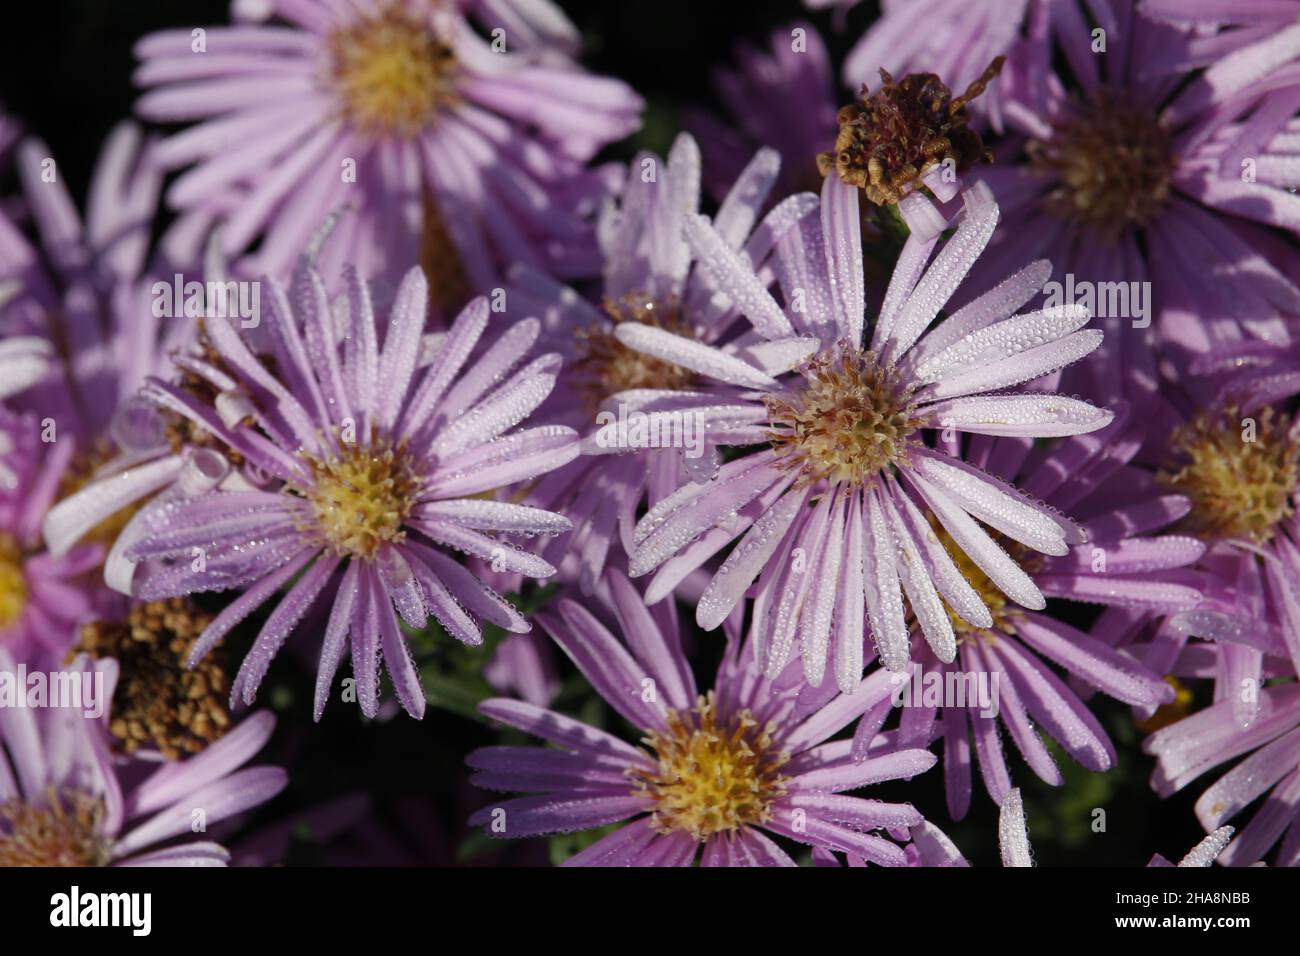 Violet flowers of New York Aster with drops of dew. Aster Novi-Belgii. Michaelmas Daisy. Erigeron glaucus or Sea Breeze plant. Stock Photo